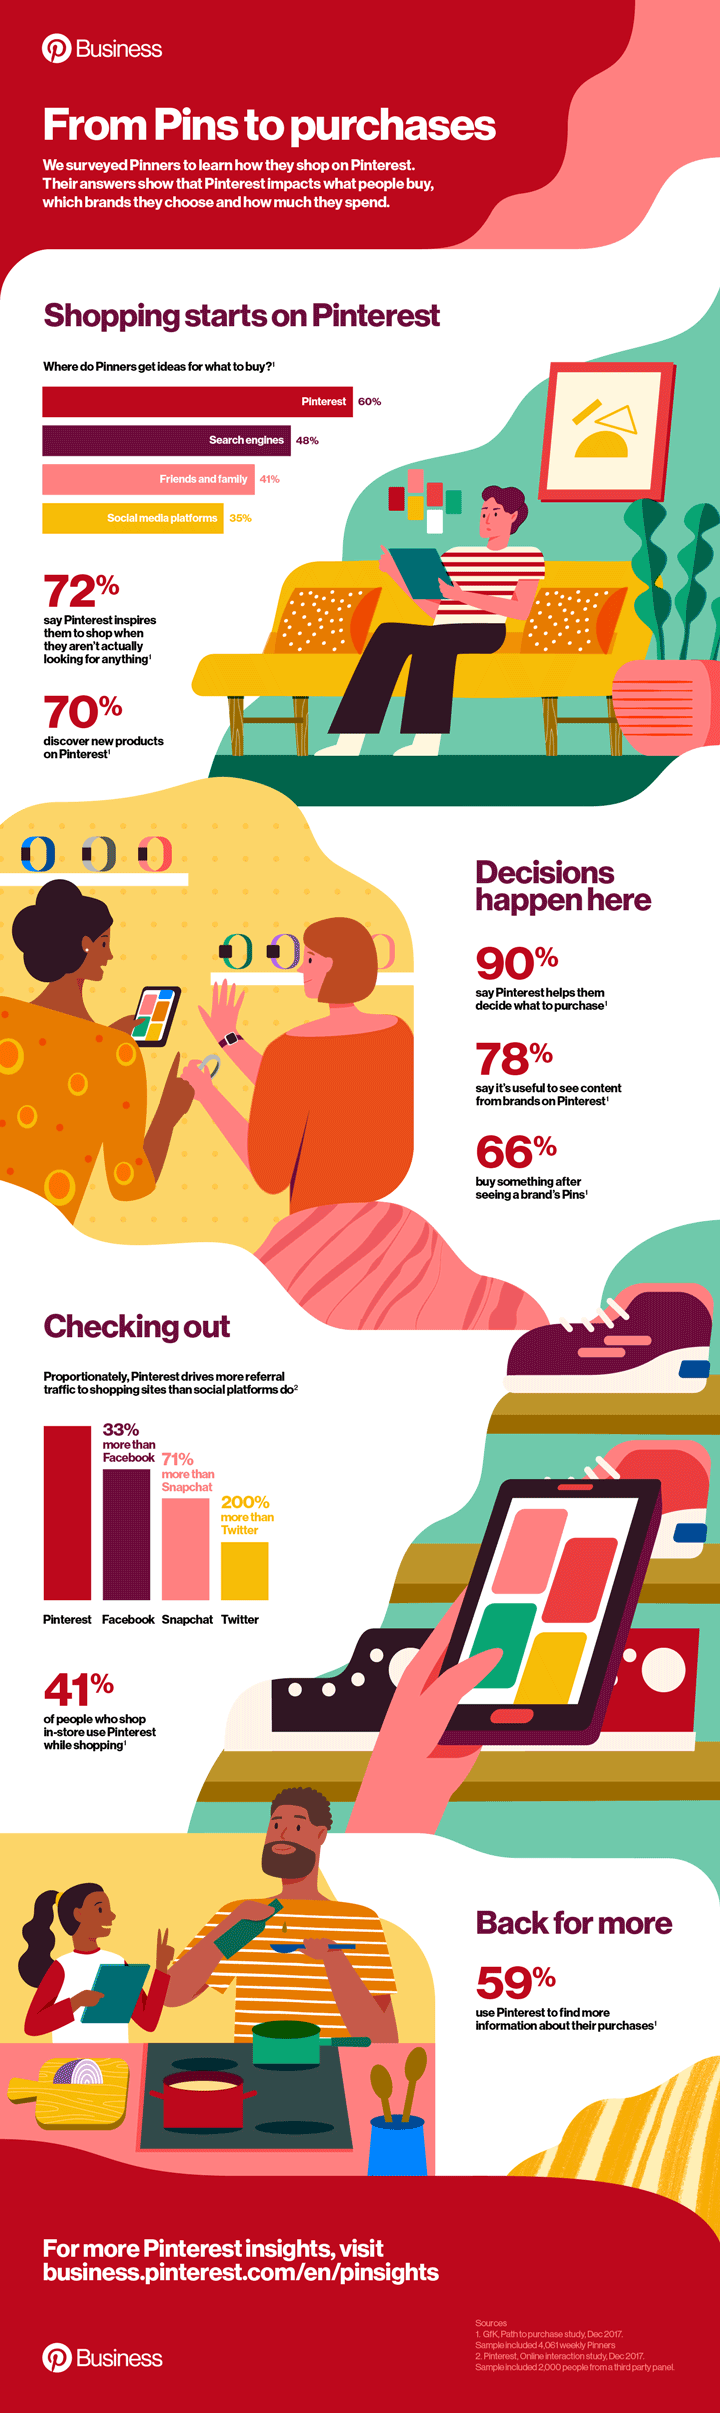 businesses benefit from Pinterest shopping infographic